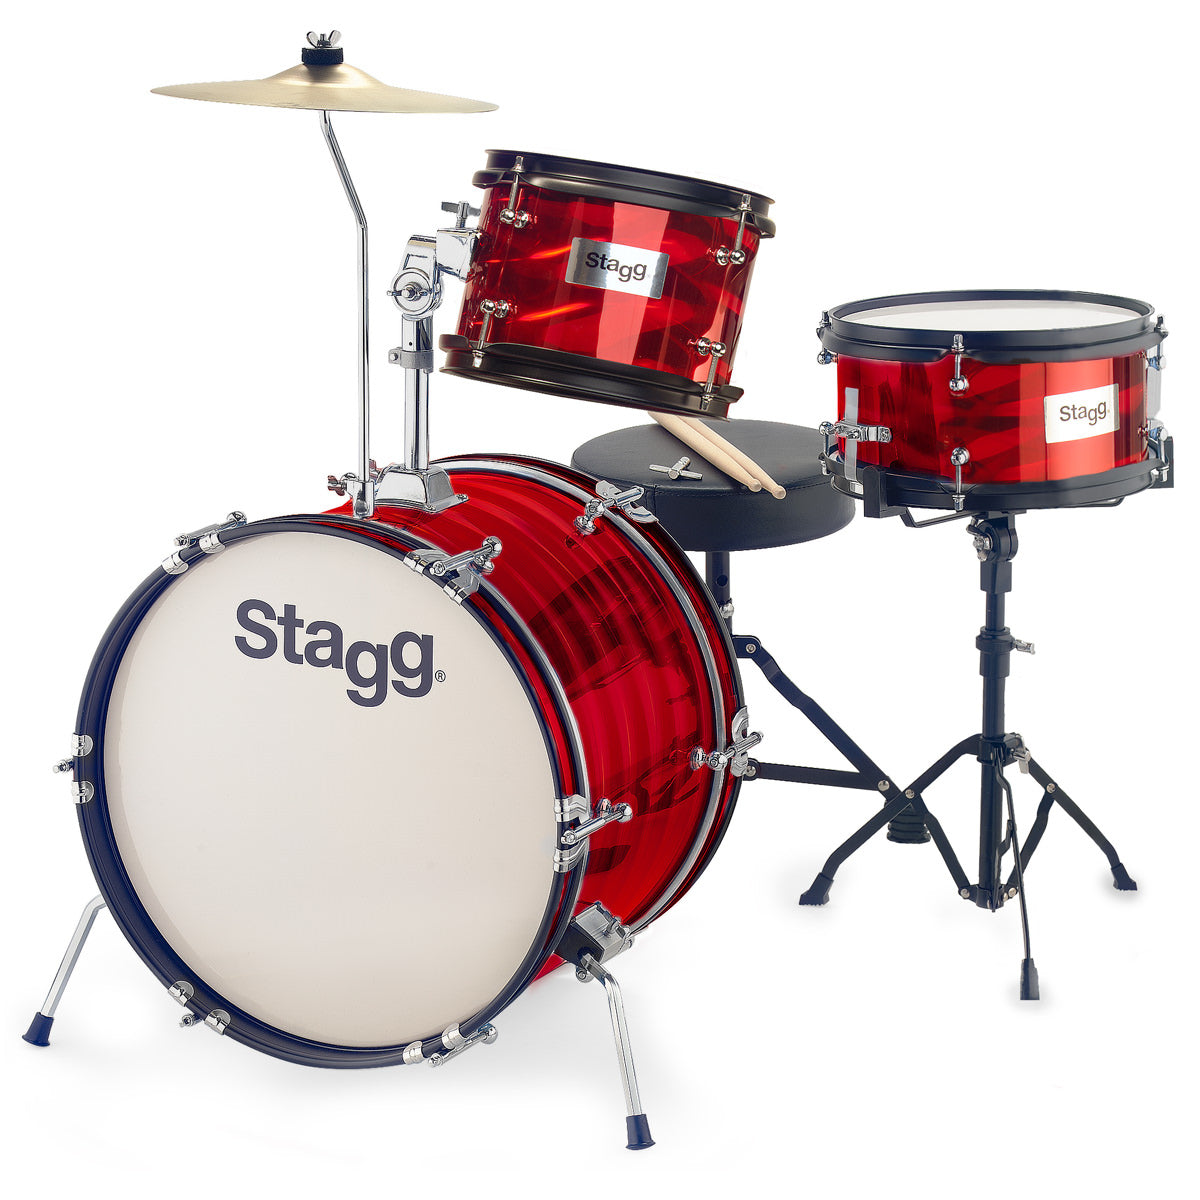 Stagg Junior Drum Kit in Red